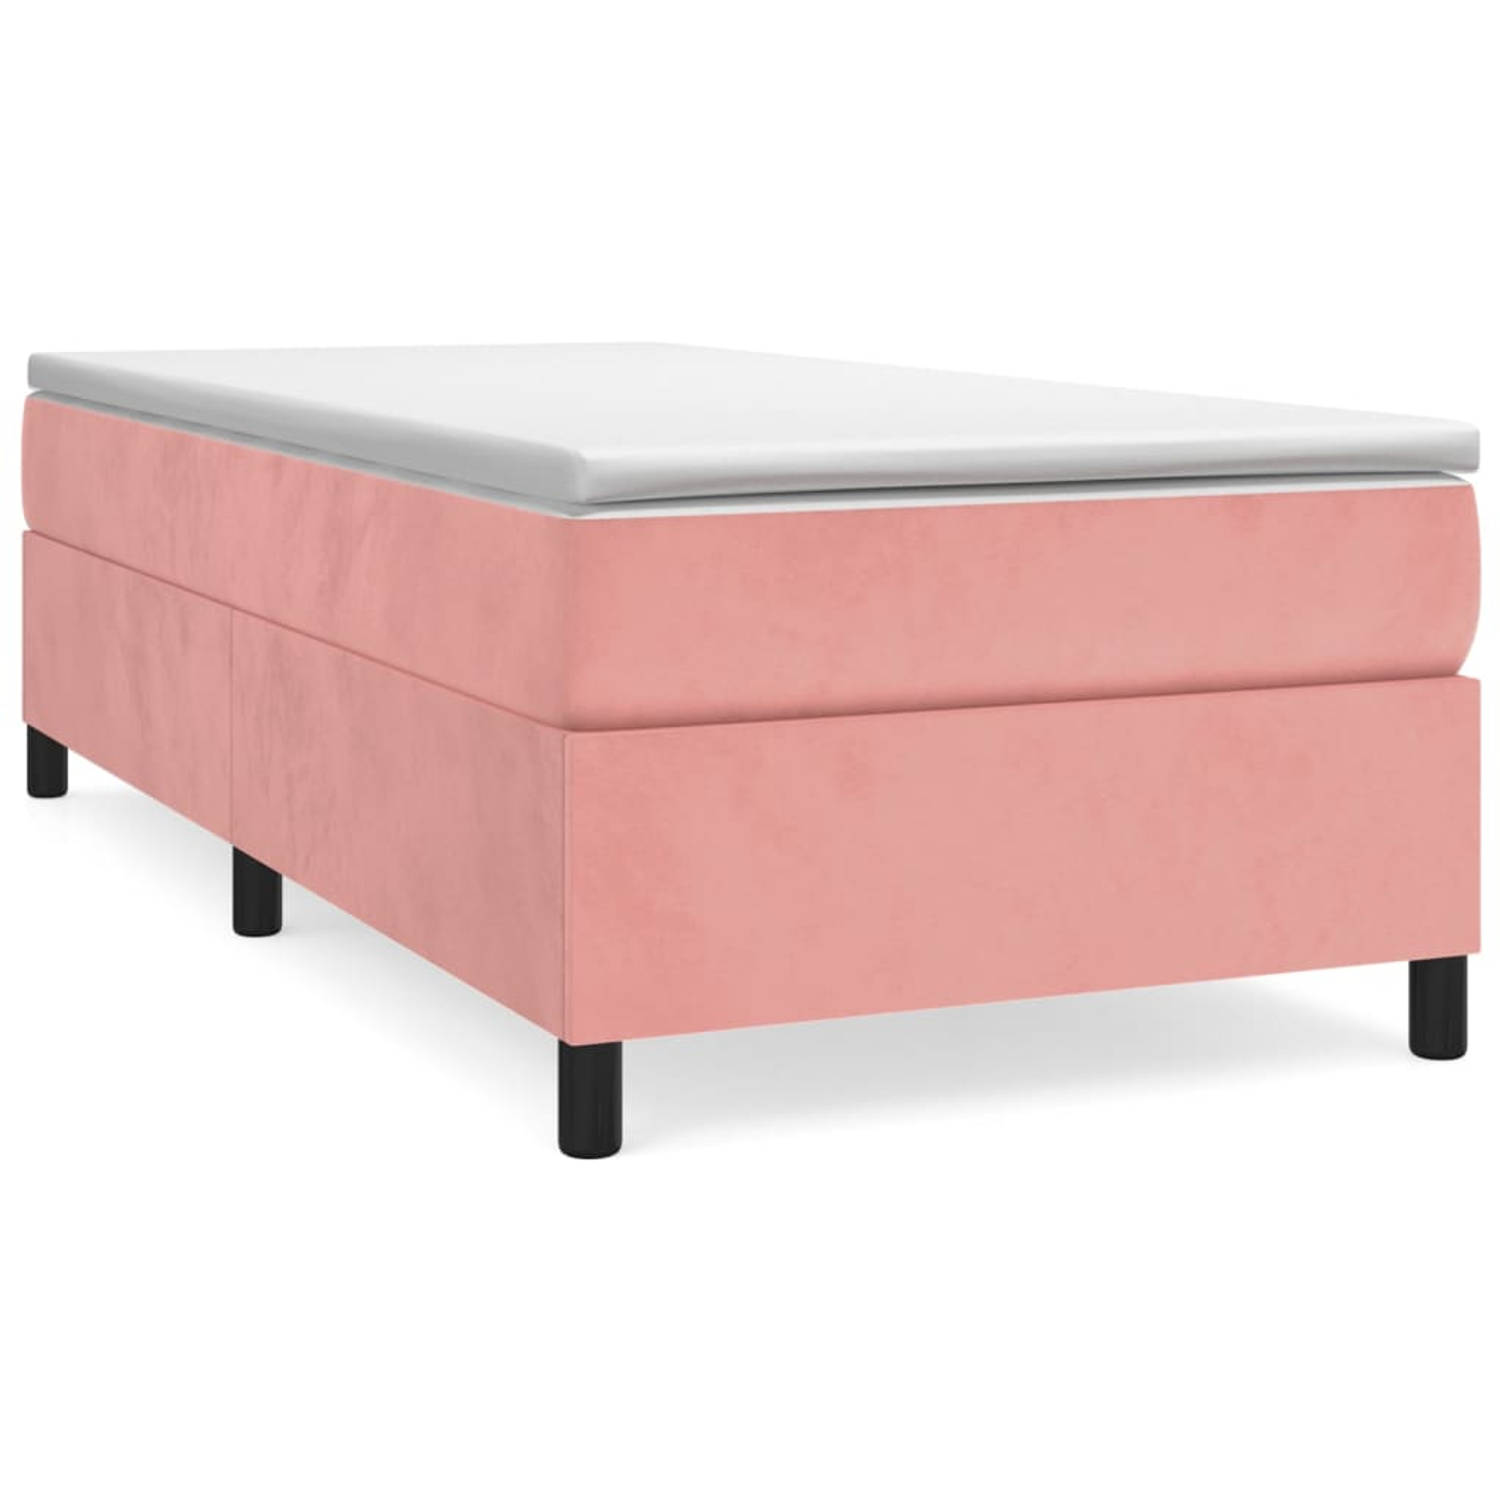 The Living Store Boxspringframe fluweel roze 100x200 cm - Bed